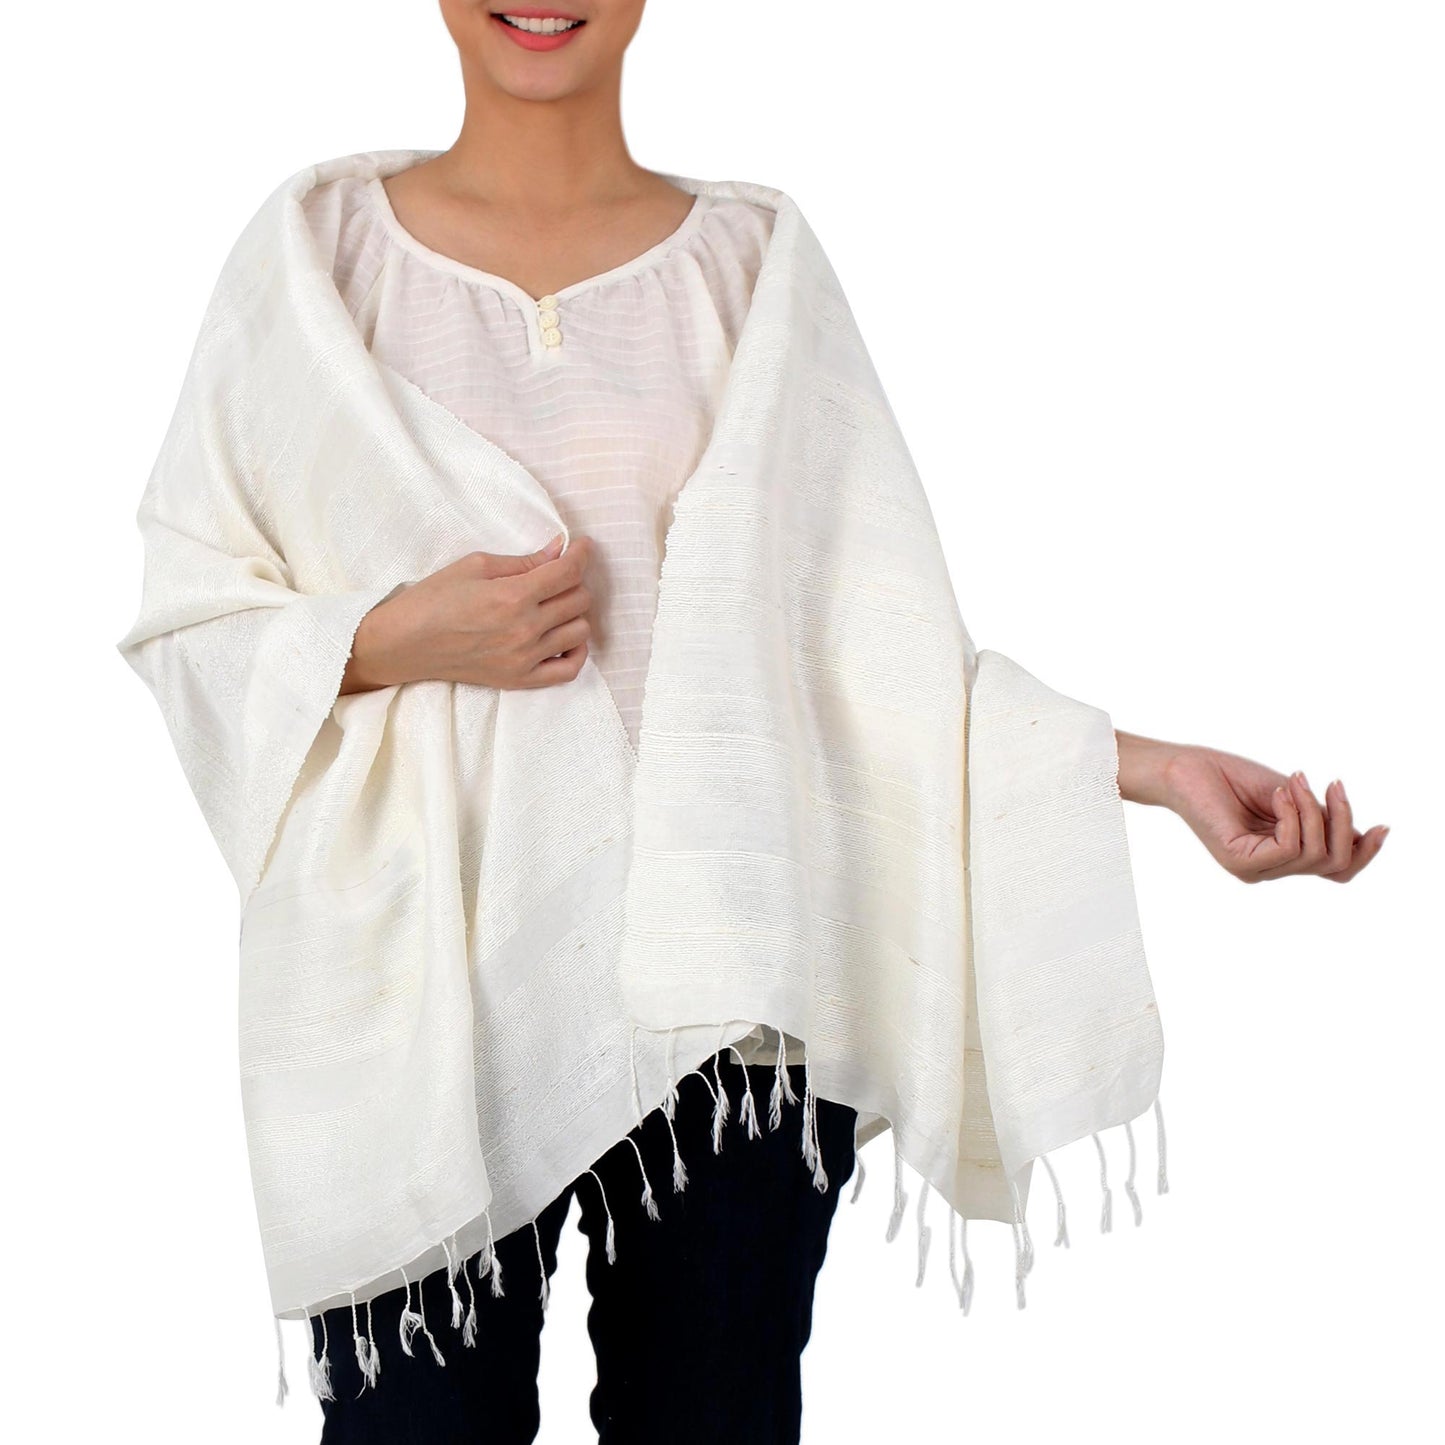 Afternoon Breeze Handwoven Fringed Silk Shawl in Ivory from Thailand